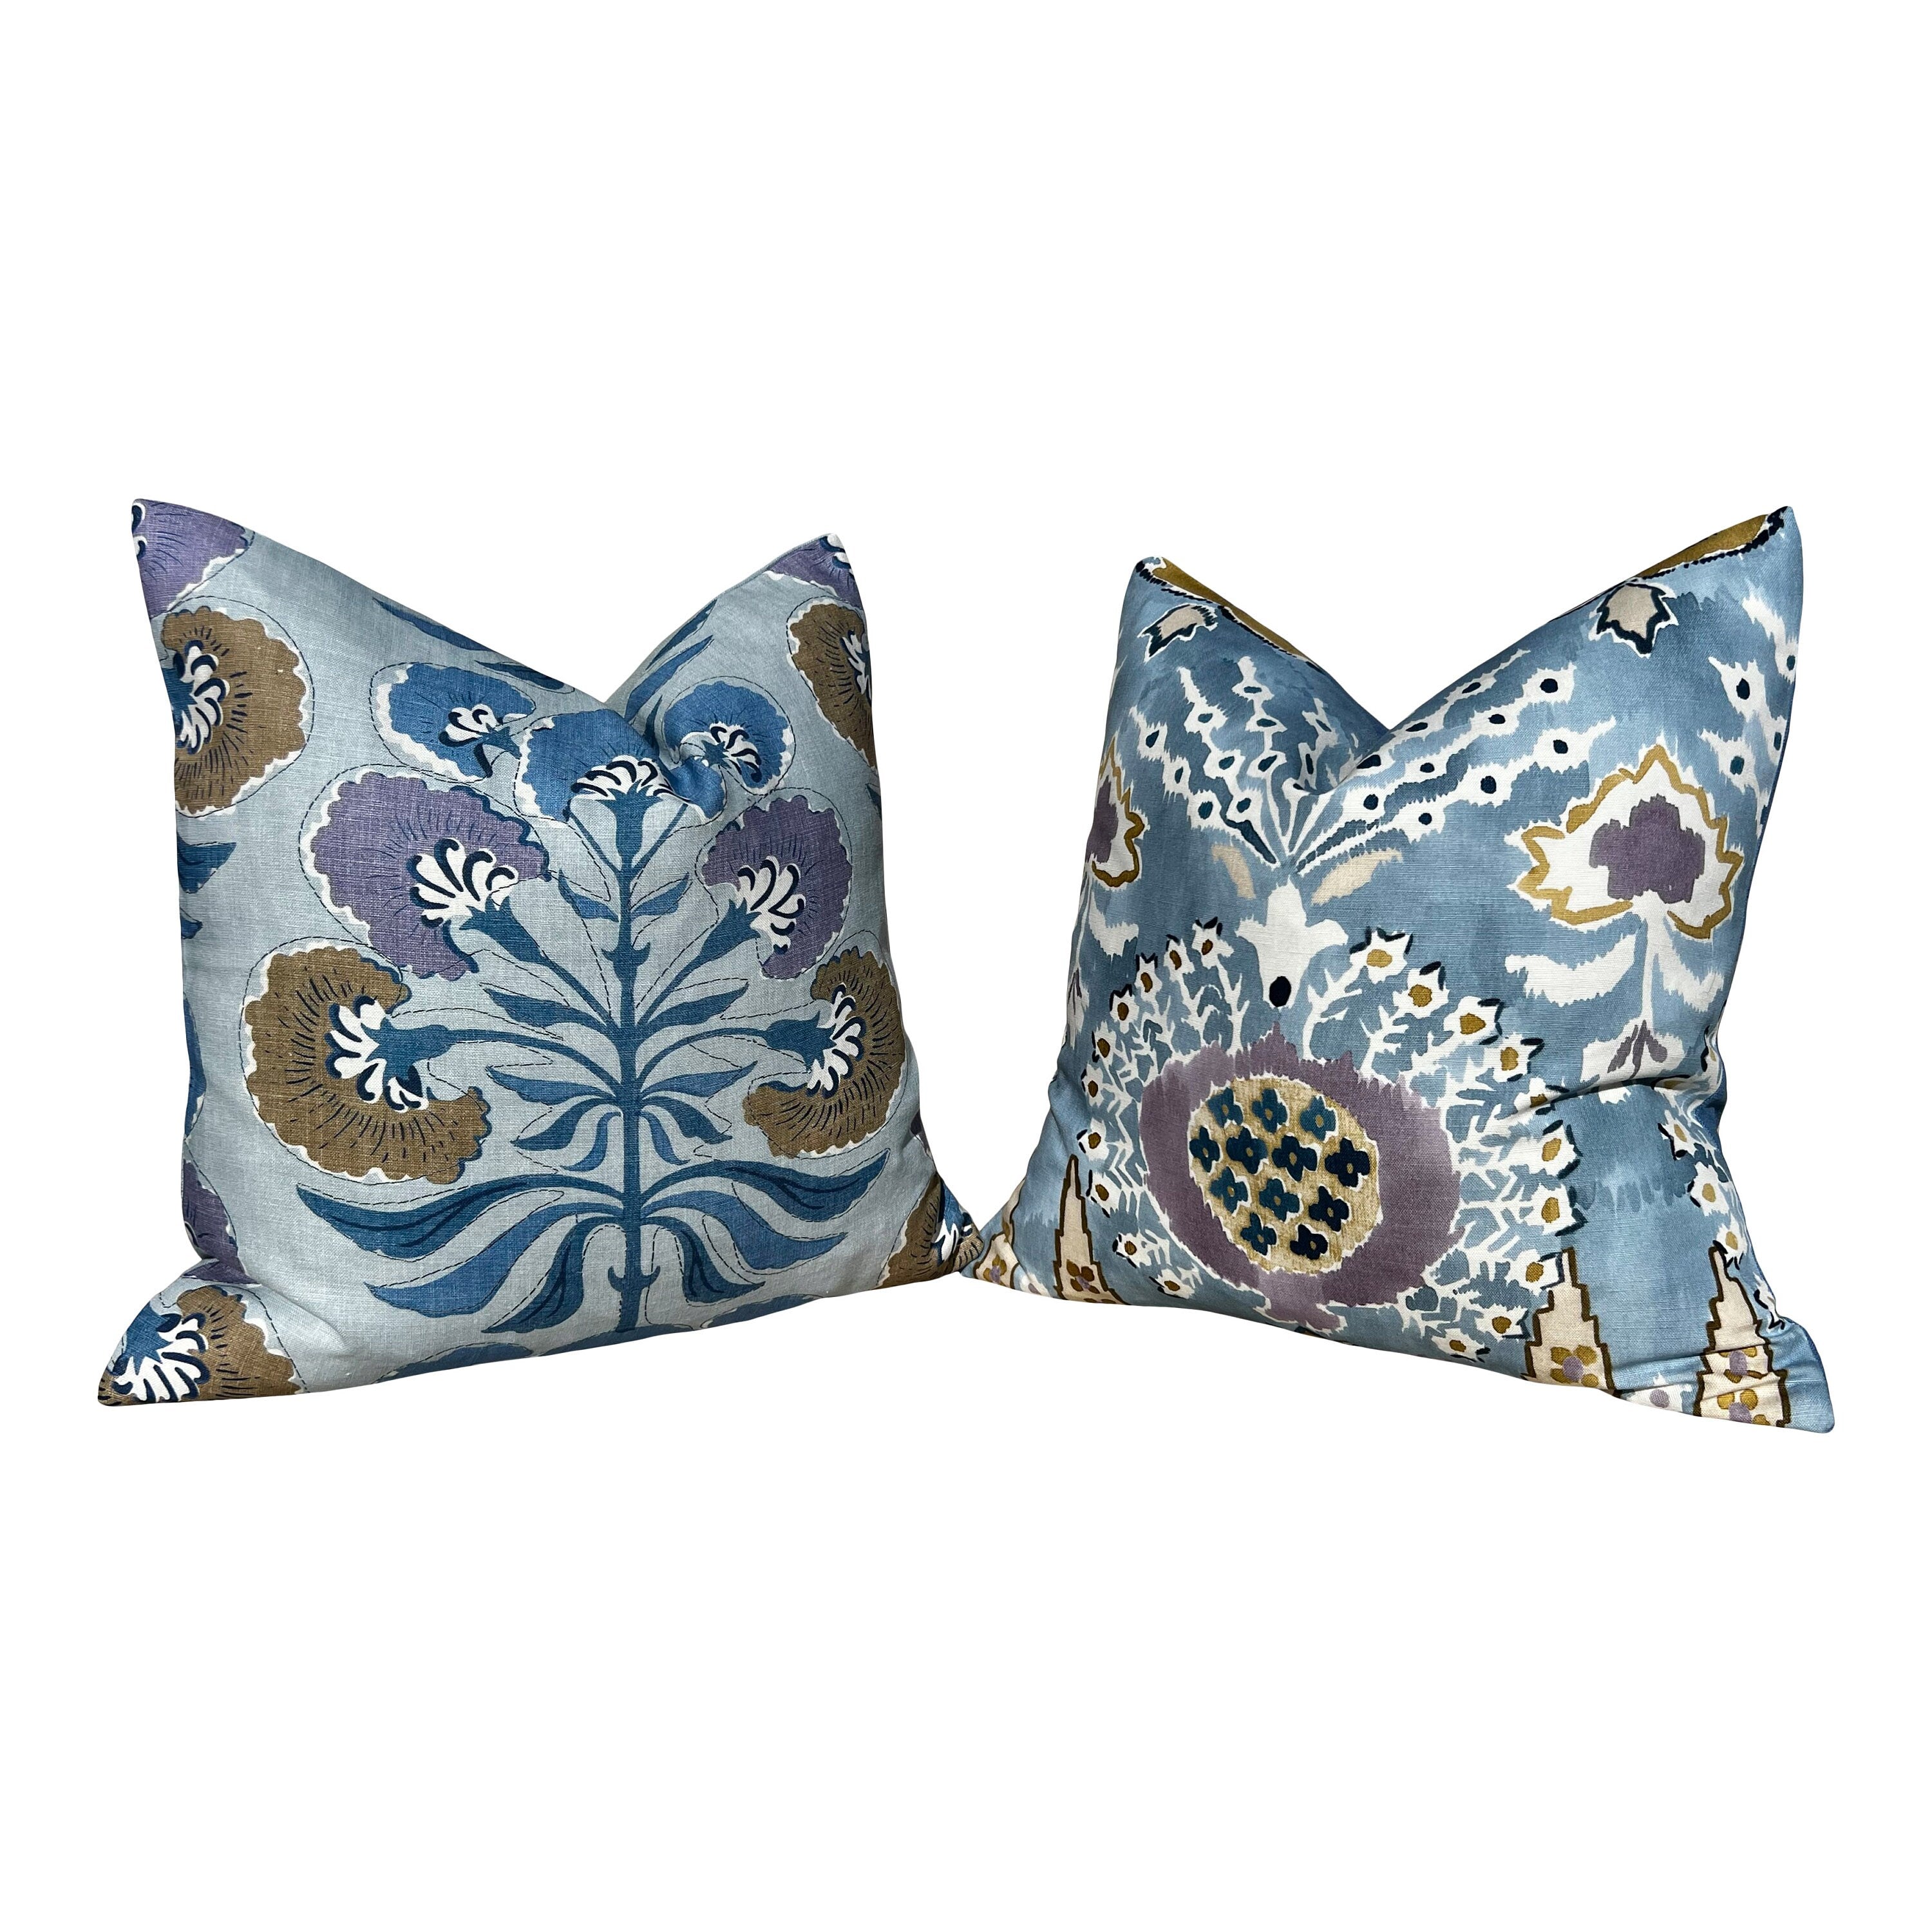 Thibaut Tybee Tree Pillow Lavender and Blue. Designer Botanical Pillows, Euro Sham Covers 26"X26", Floral Pillow Blue Red, High End Pillow